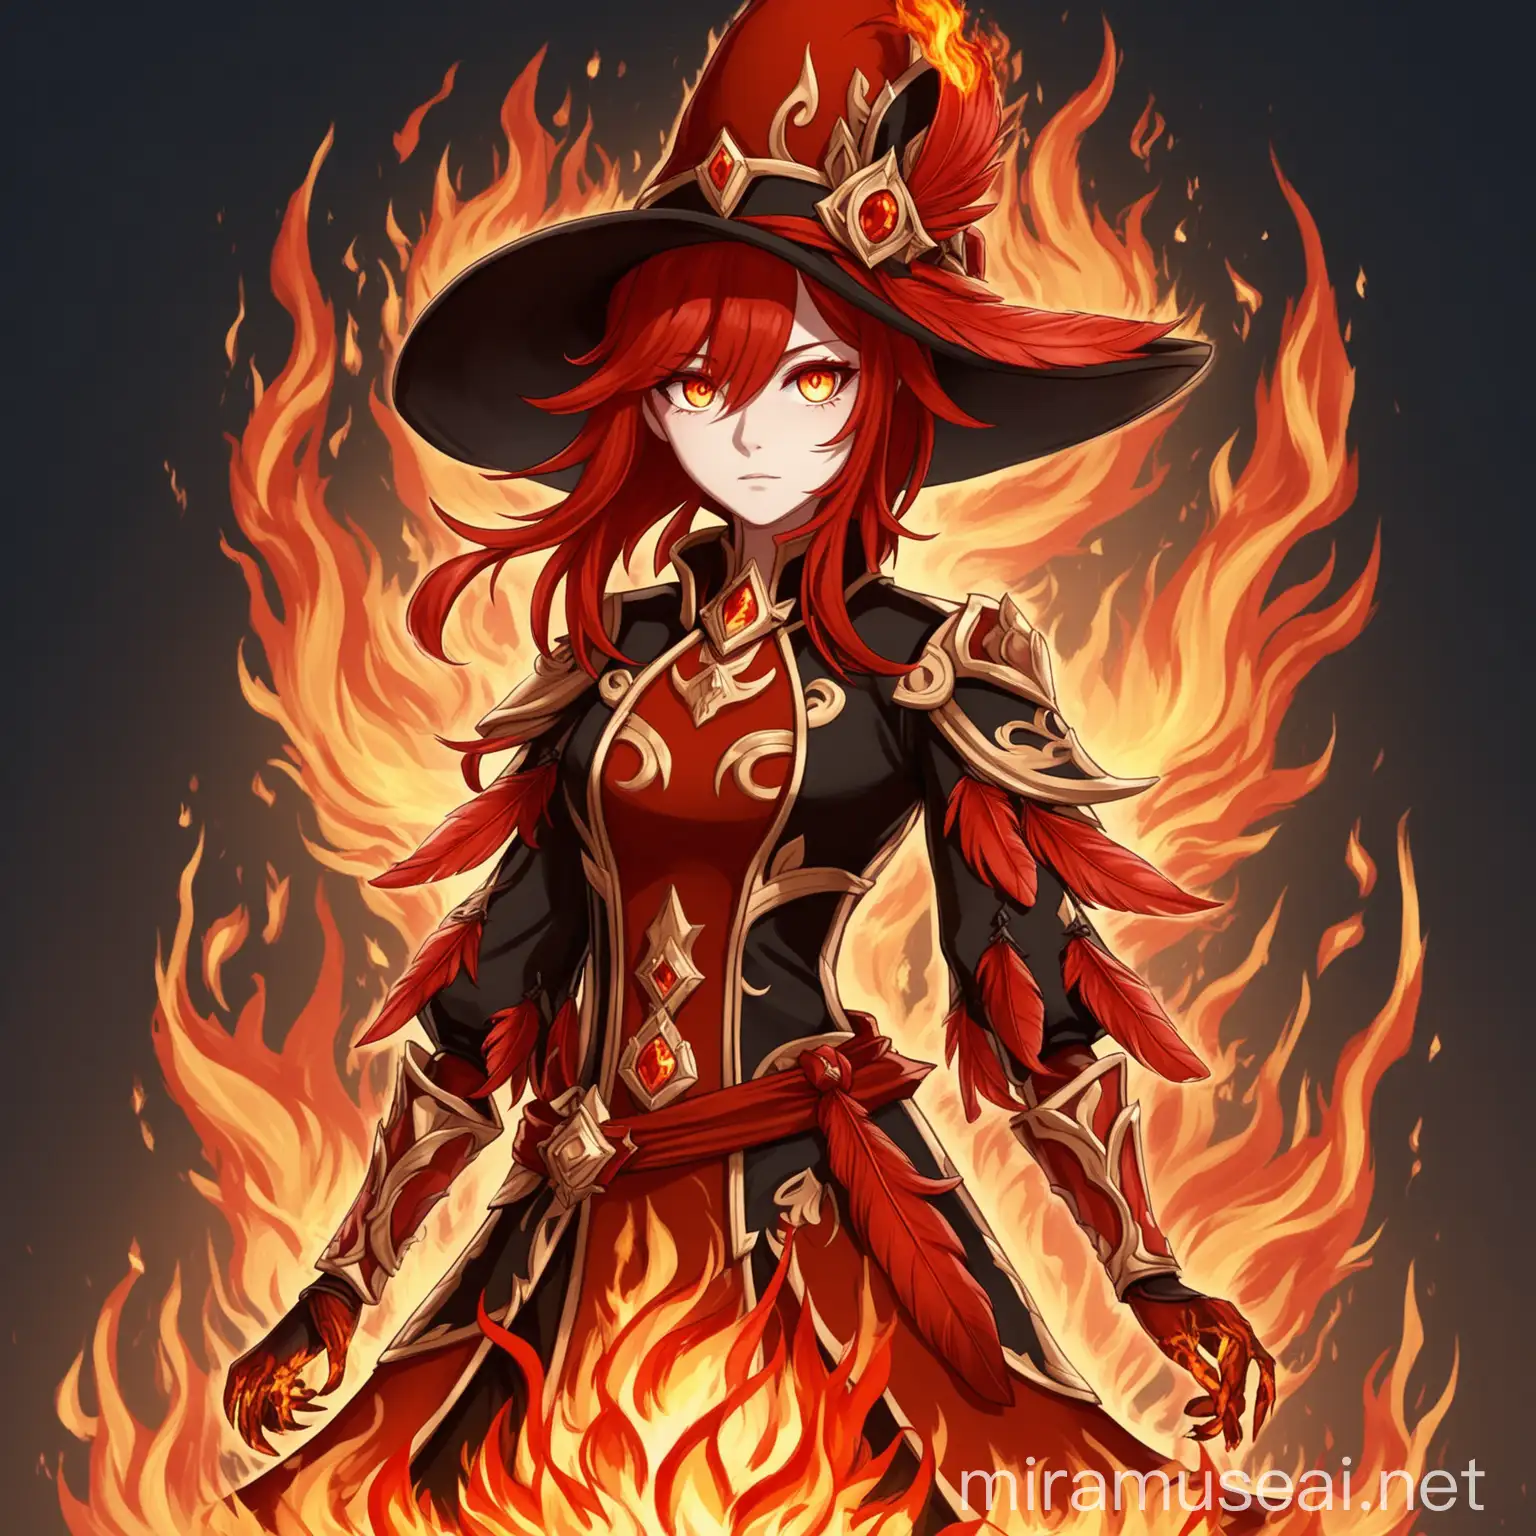 Create a GenshinImpact type of character. A tall female, who wears a red and black hat with red feathers. Her pupils burn with fire and her red hair with golden highlights at the ends of her hair is tied in a low ponytail, with two strands framing her face in the same color.